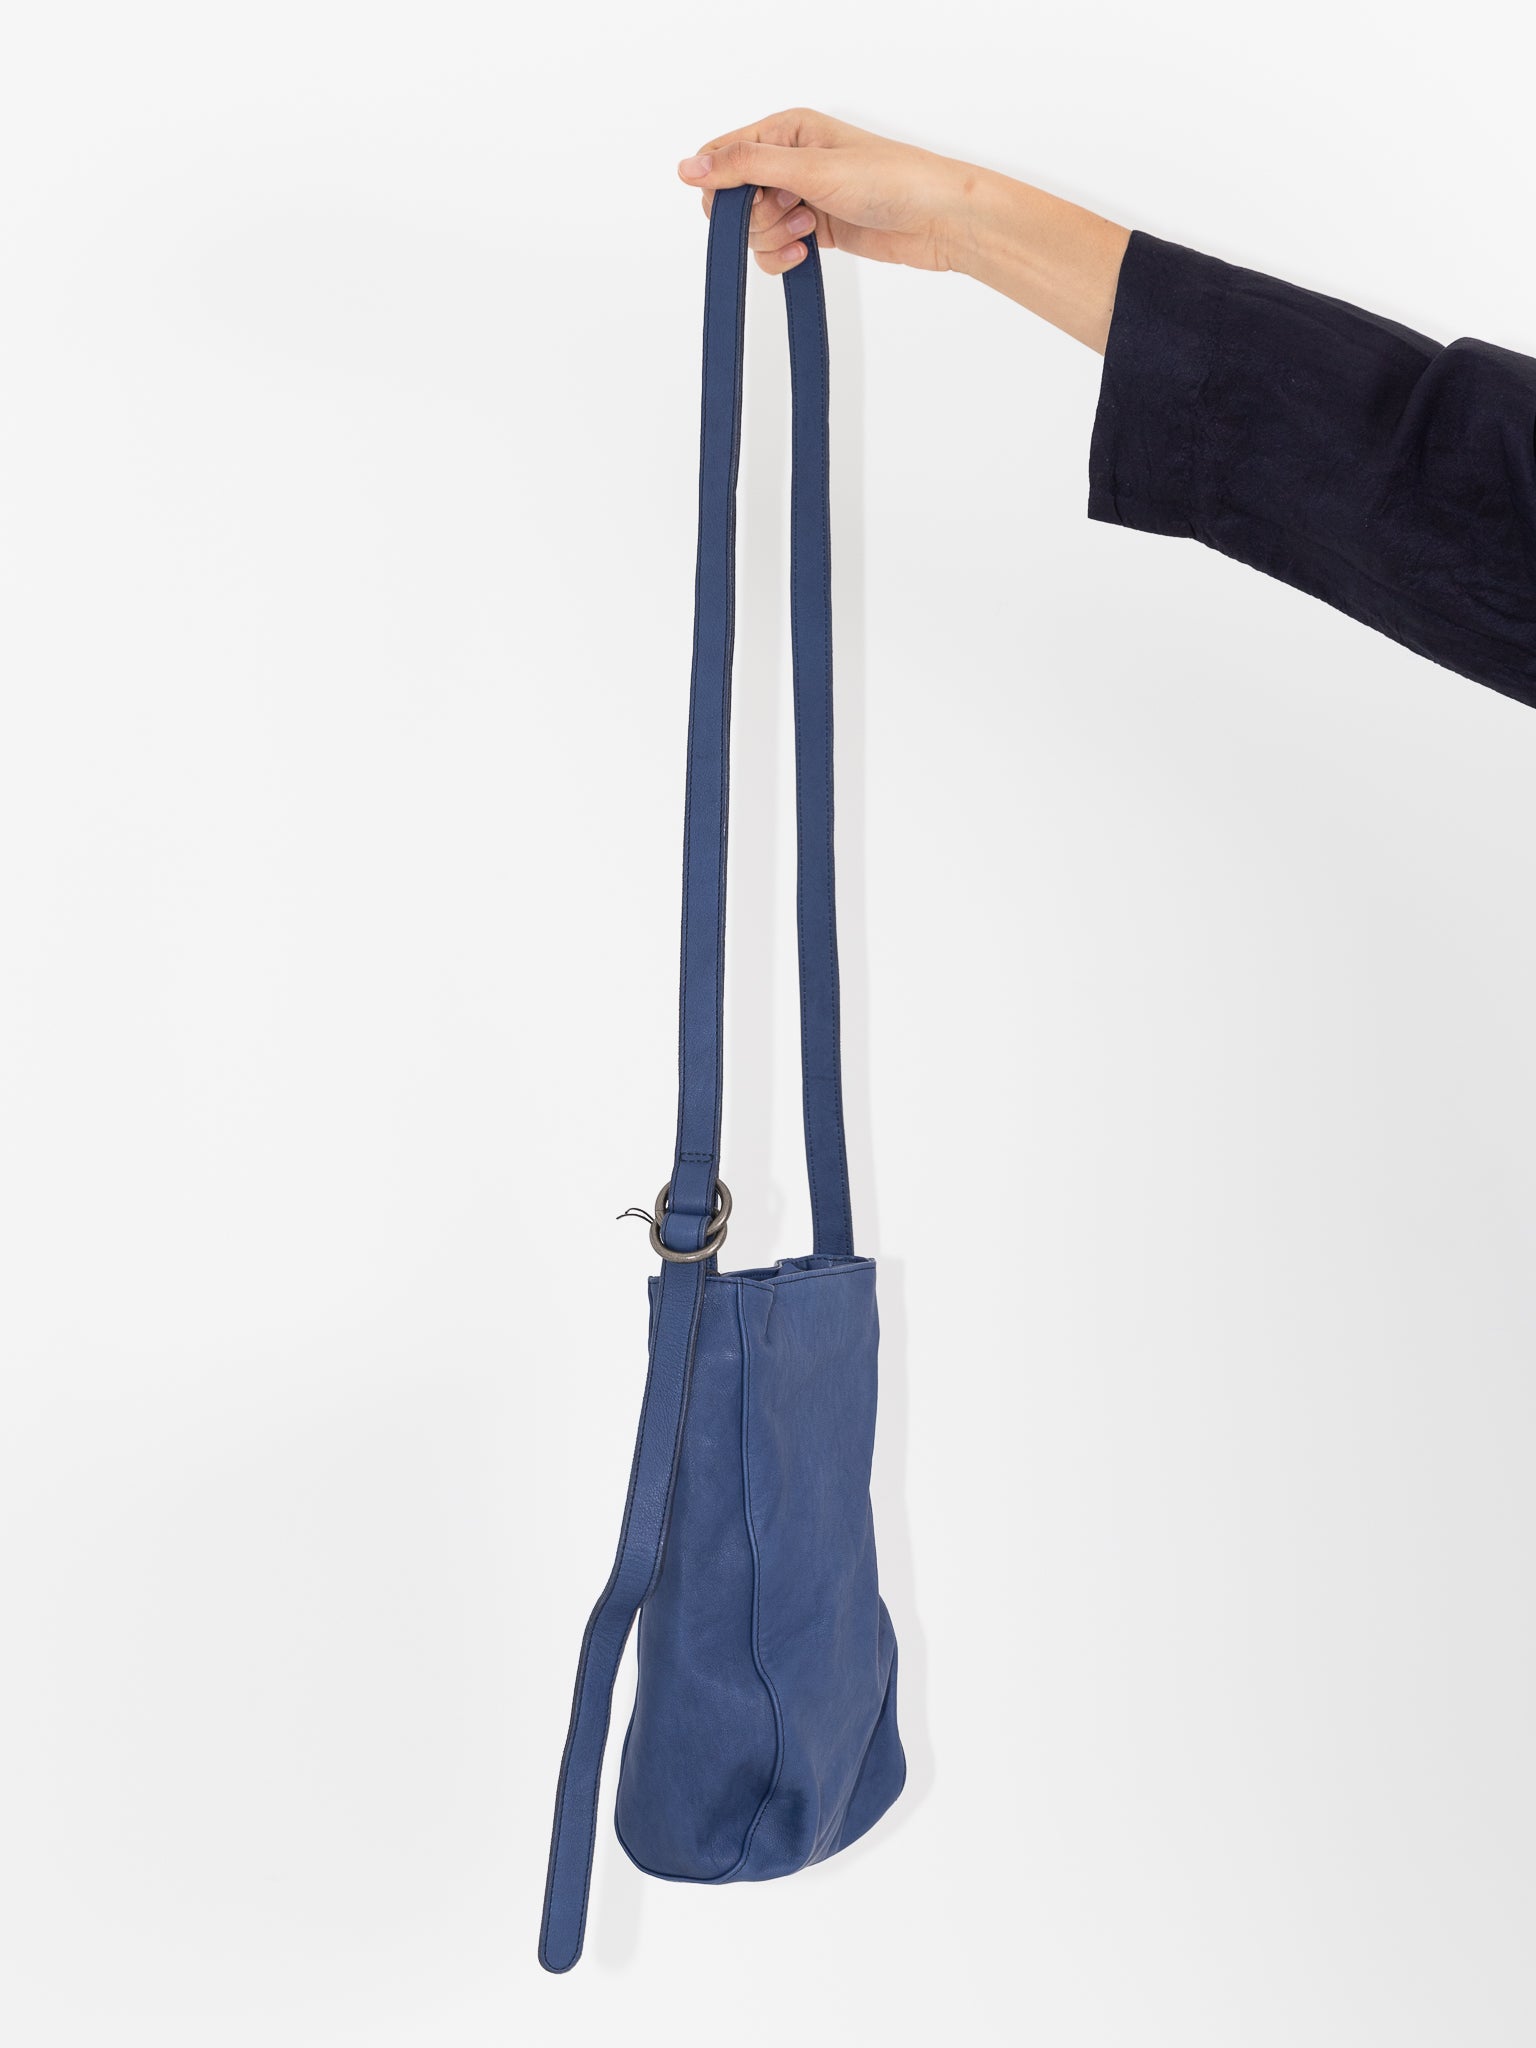 Christian Peau Small Shoulder Bag, Navy - Worthwhile